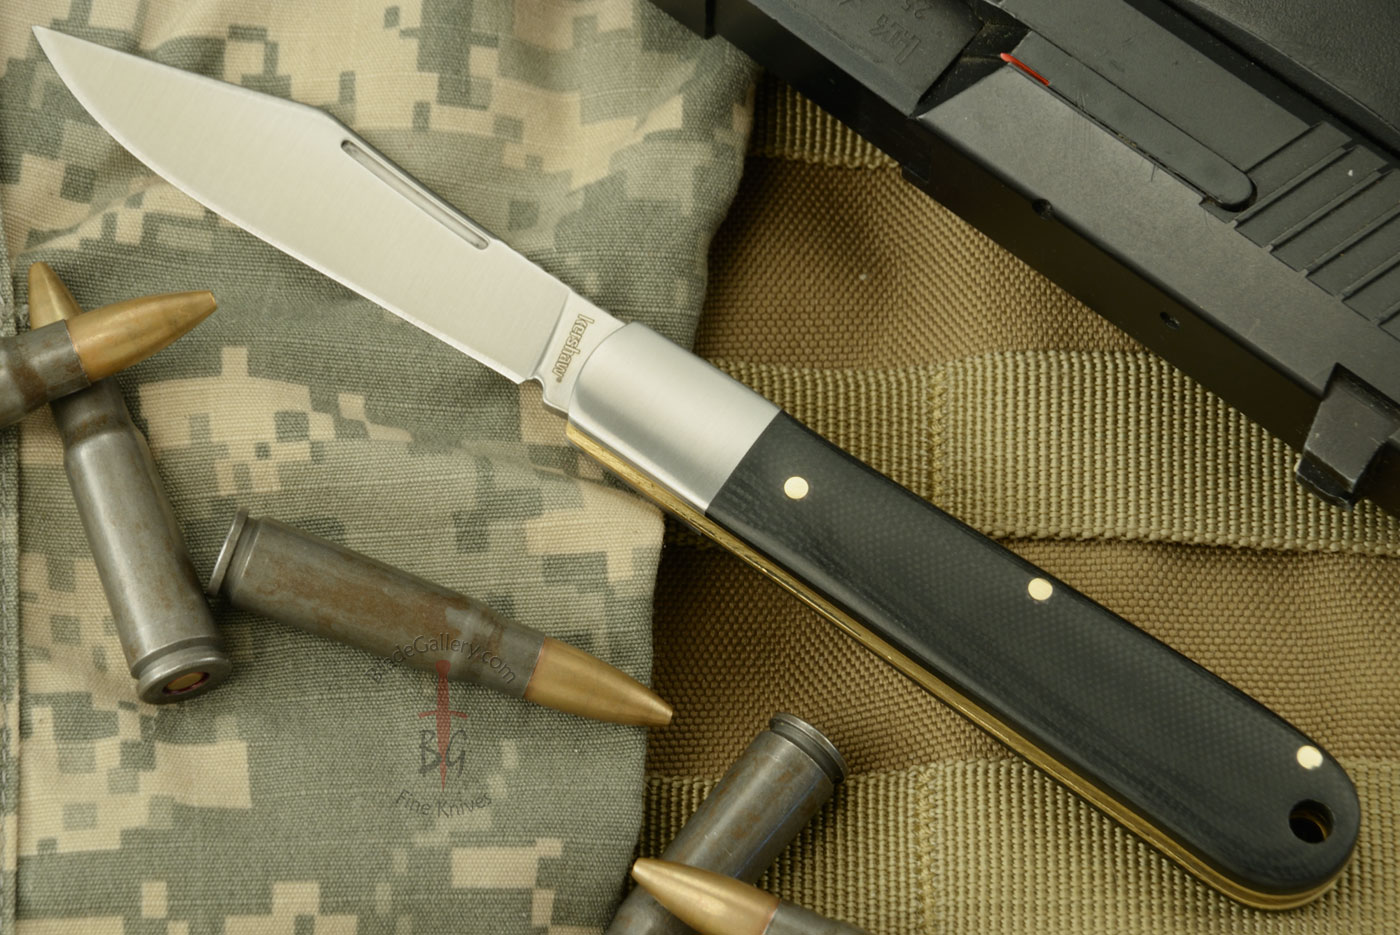 Culpepper Slipjoint with Black G-10 (4383)